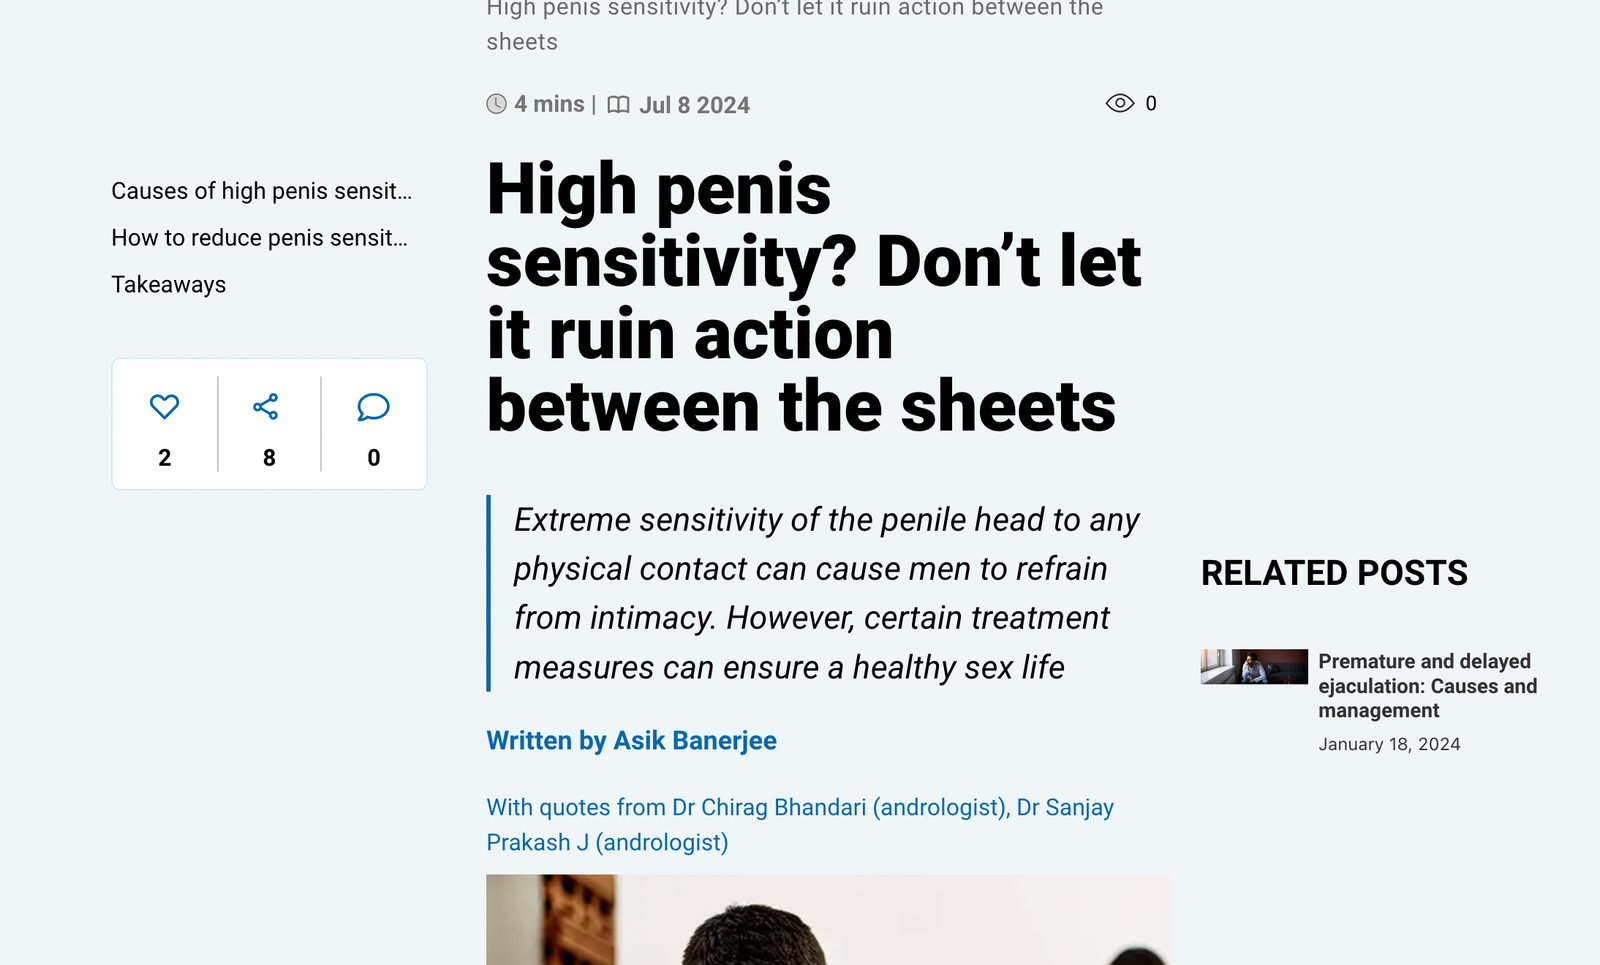 High penis sensitivity? Don’t let it ruin action between the sheets